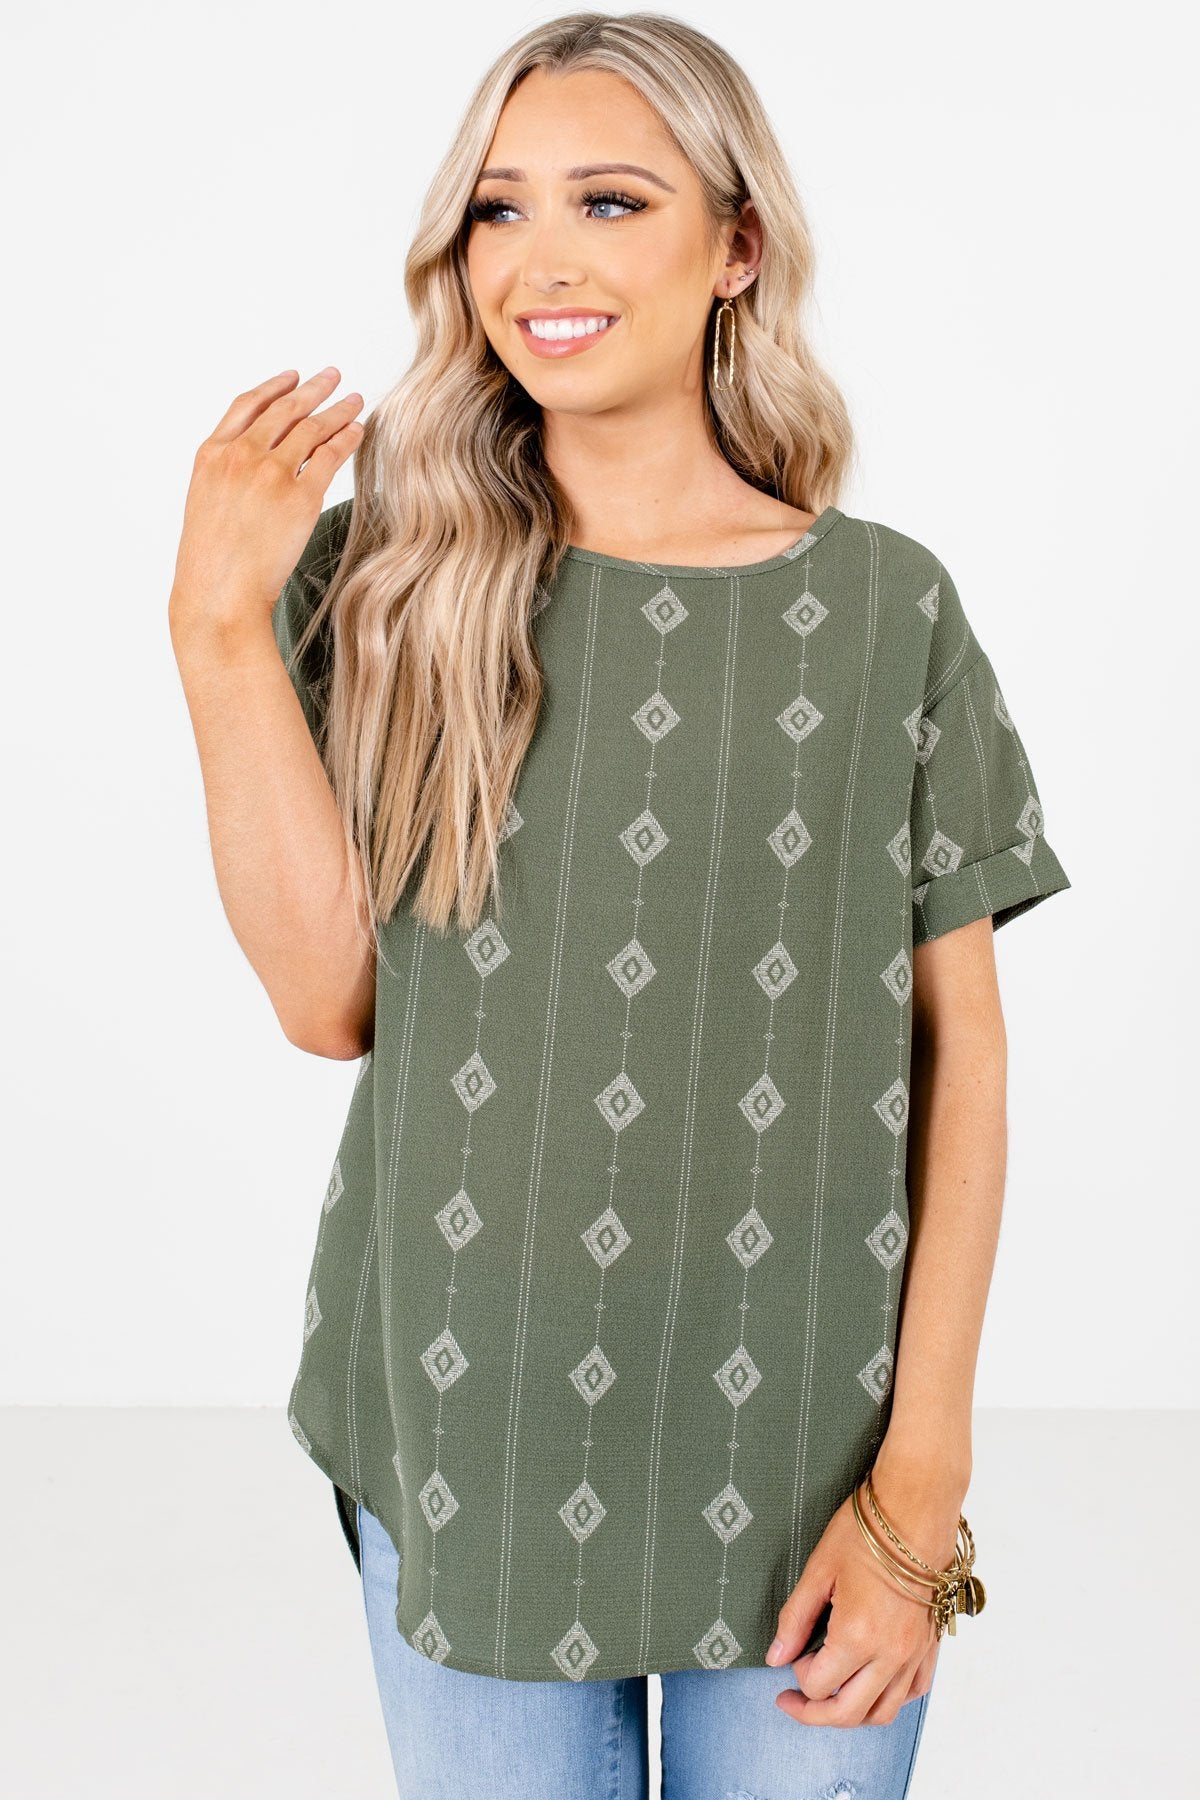 Sage Green Diamond Patterned Boutique Blouses for Women